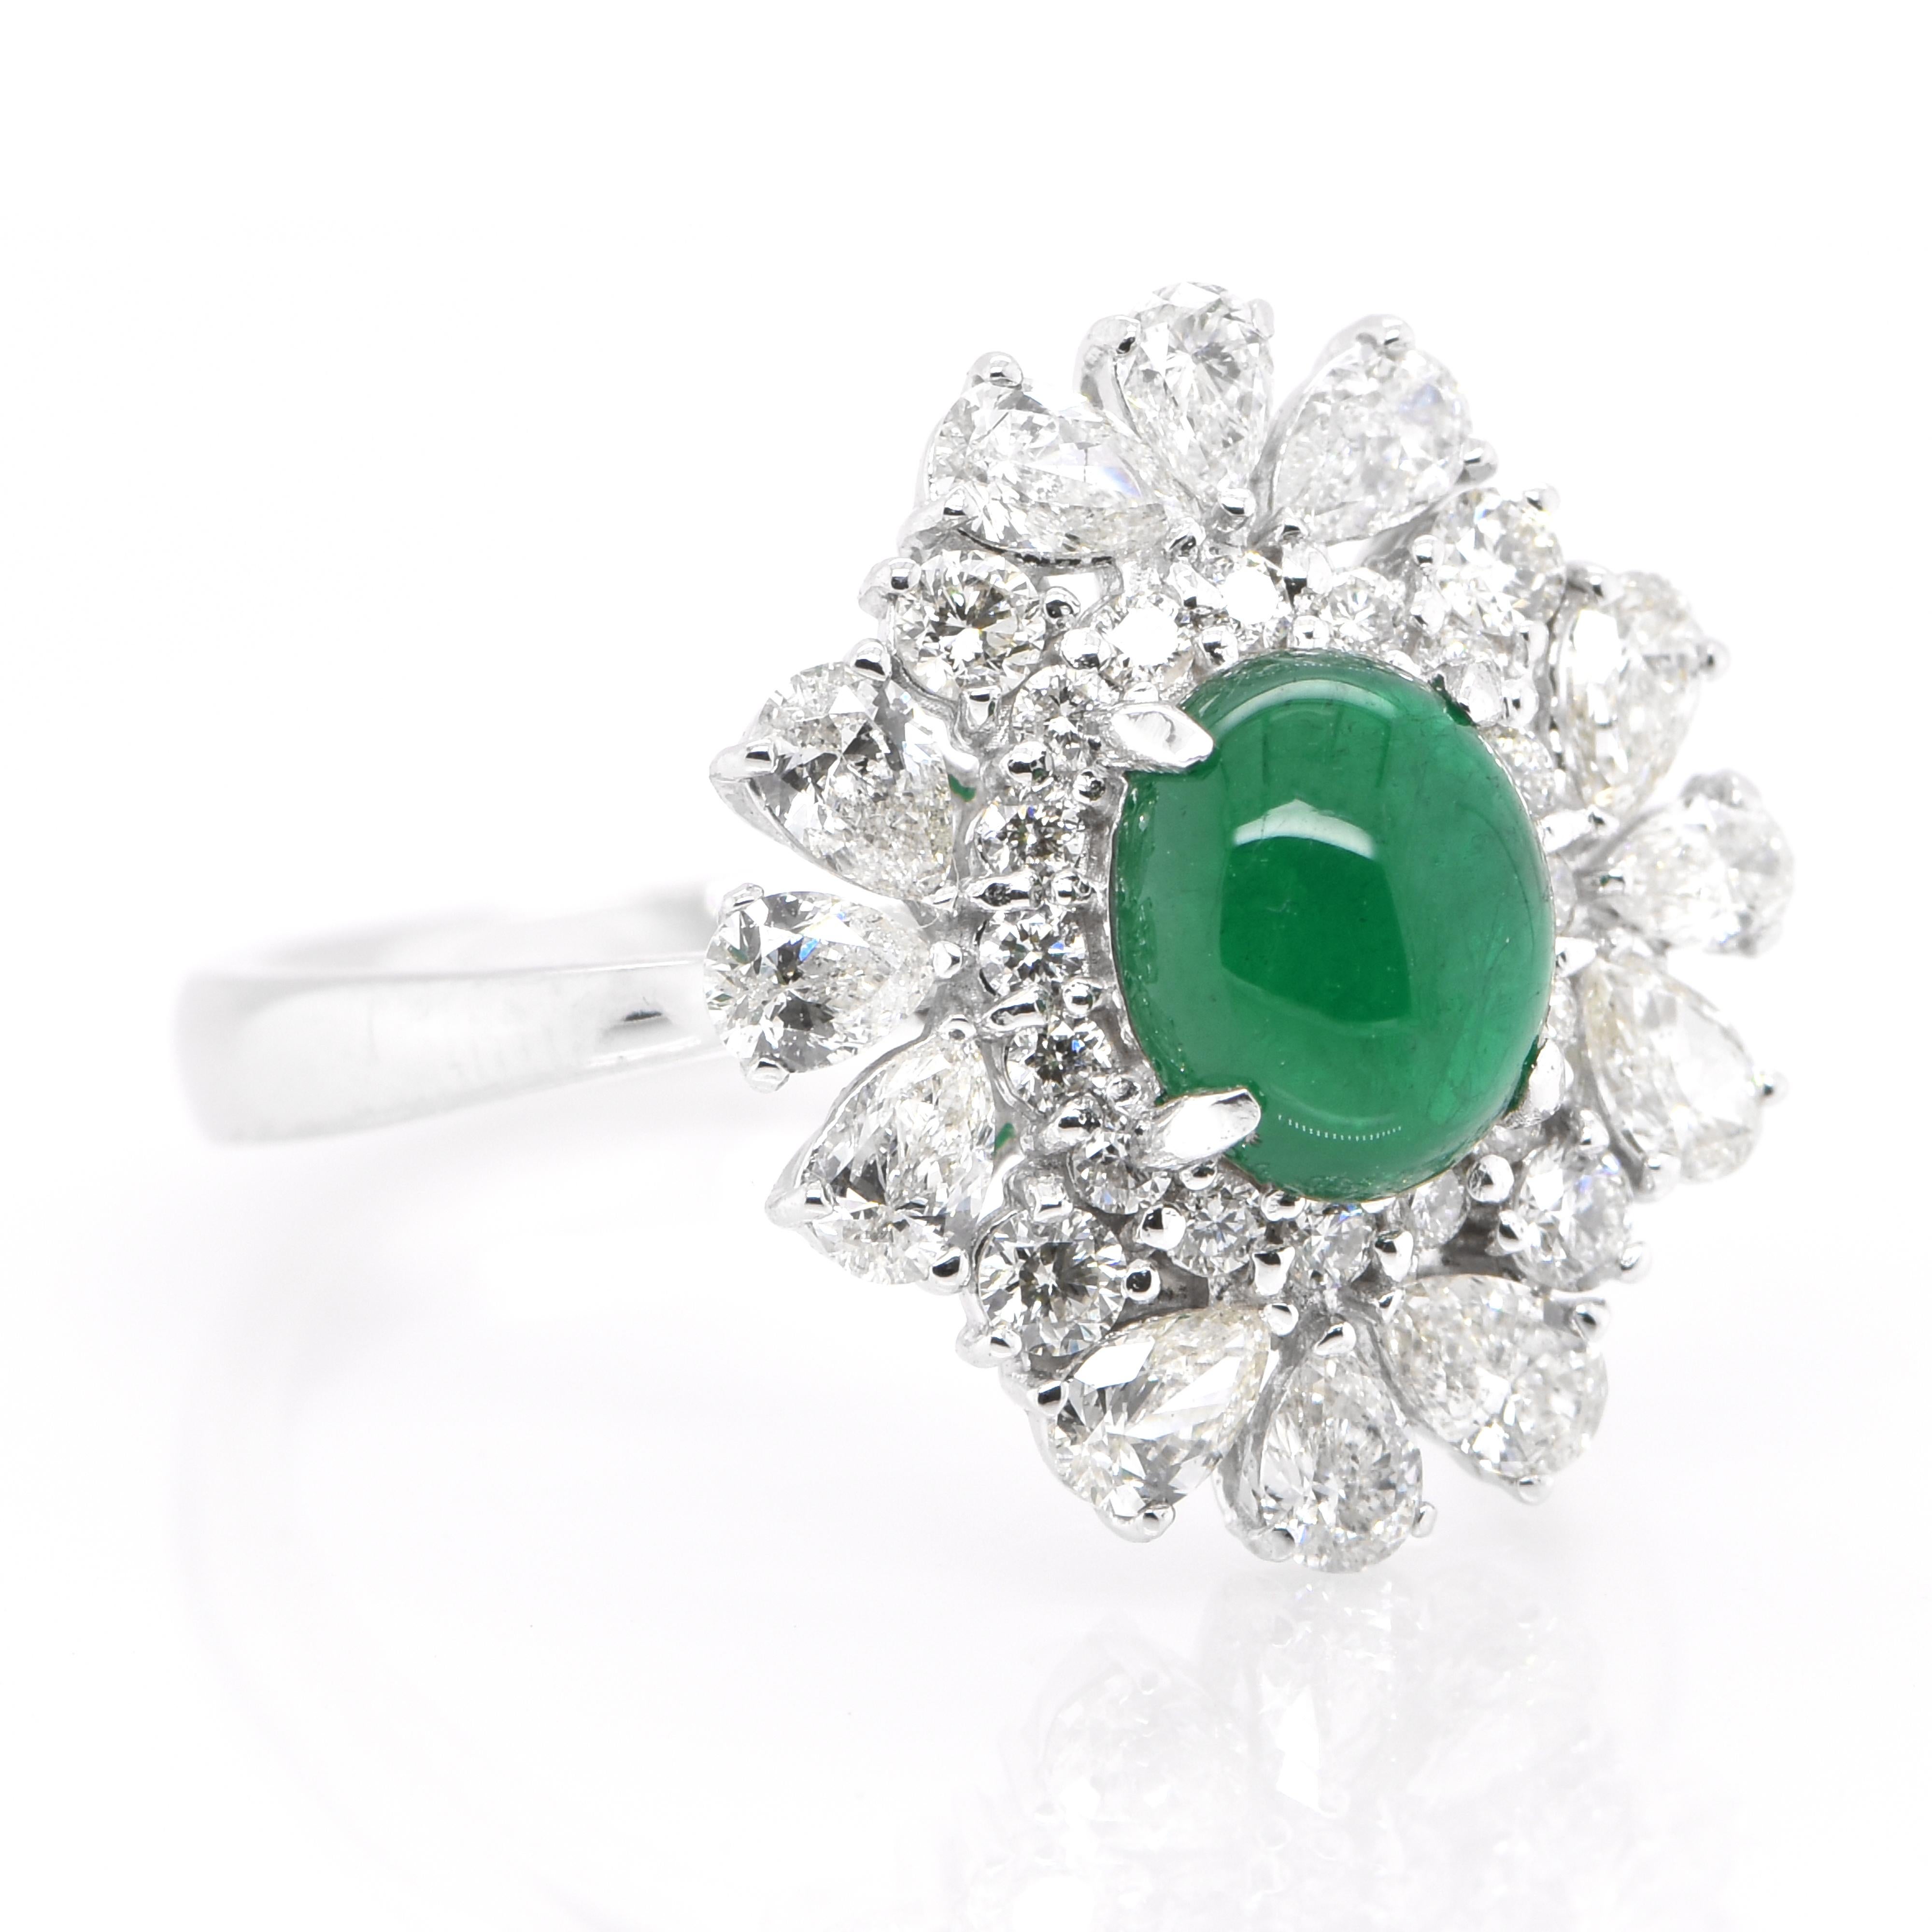 Modern 1.13 Carat Natural Emerald Cabochon and Diamond Ring Set in Platinum For Sale